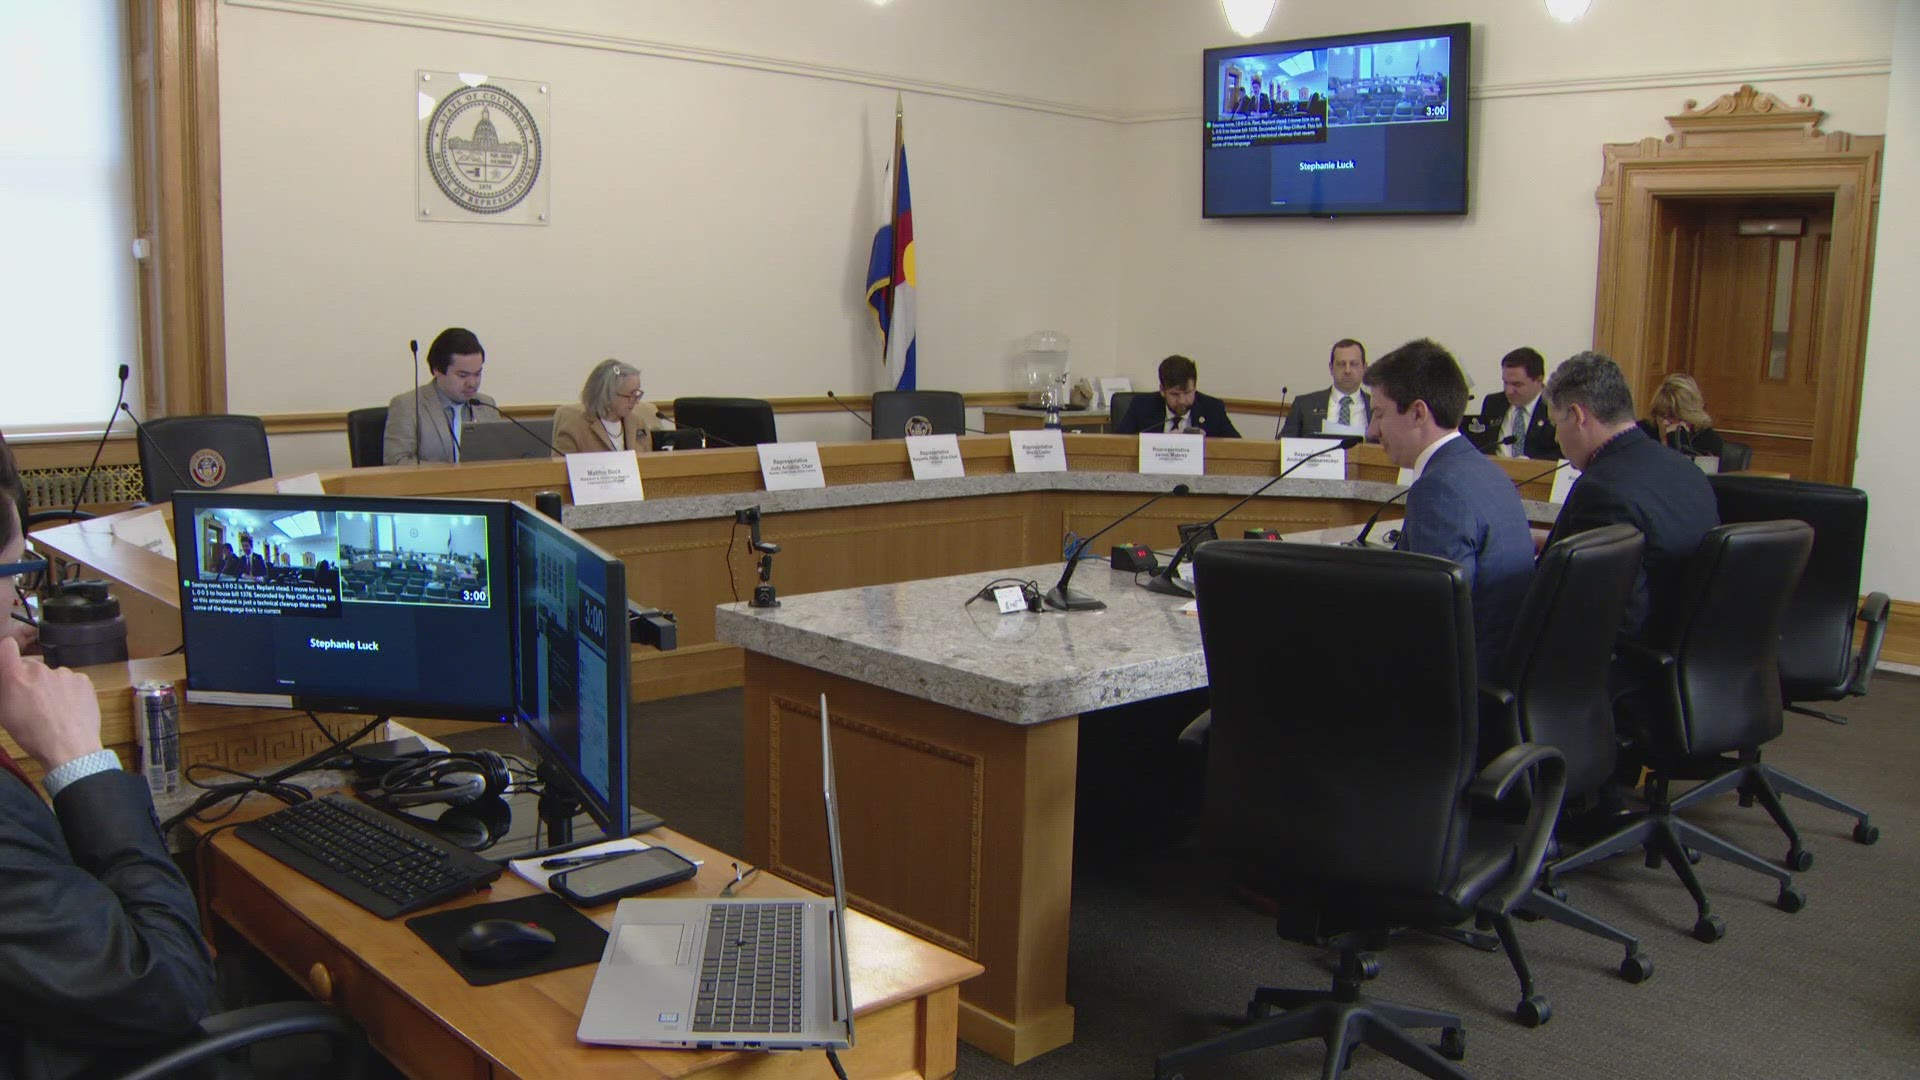 A new bill is making its way through the Colorado legislature that the sponsors say would protect consumers during event ticket sales.